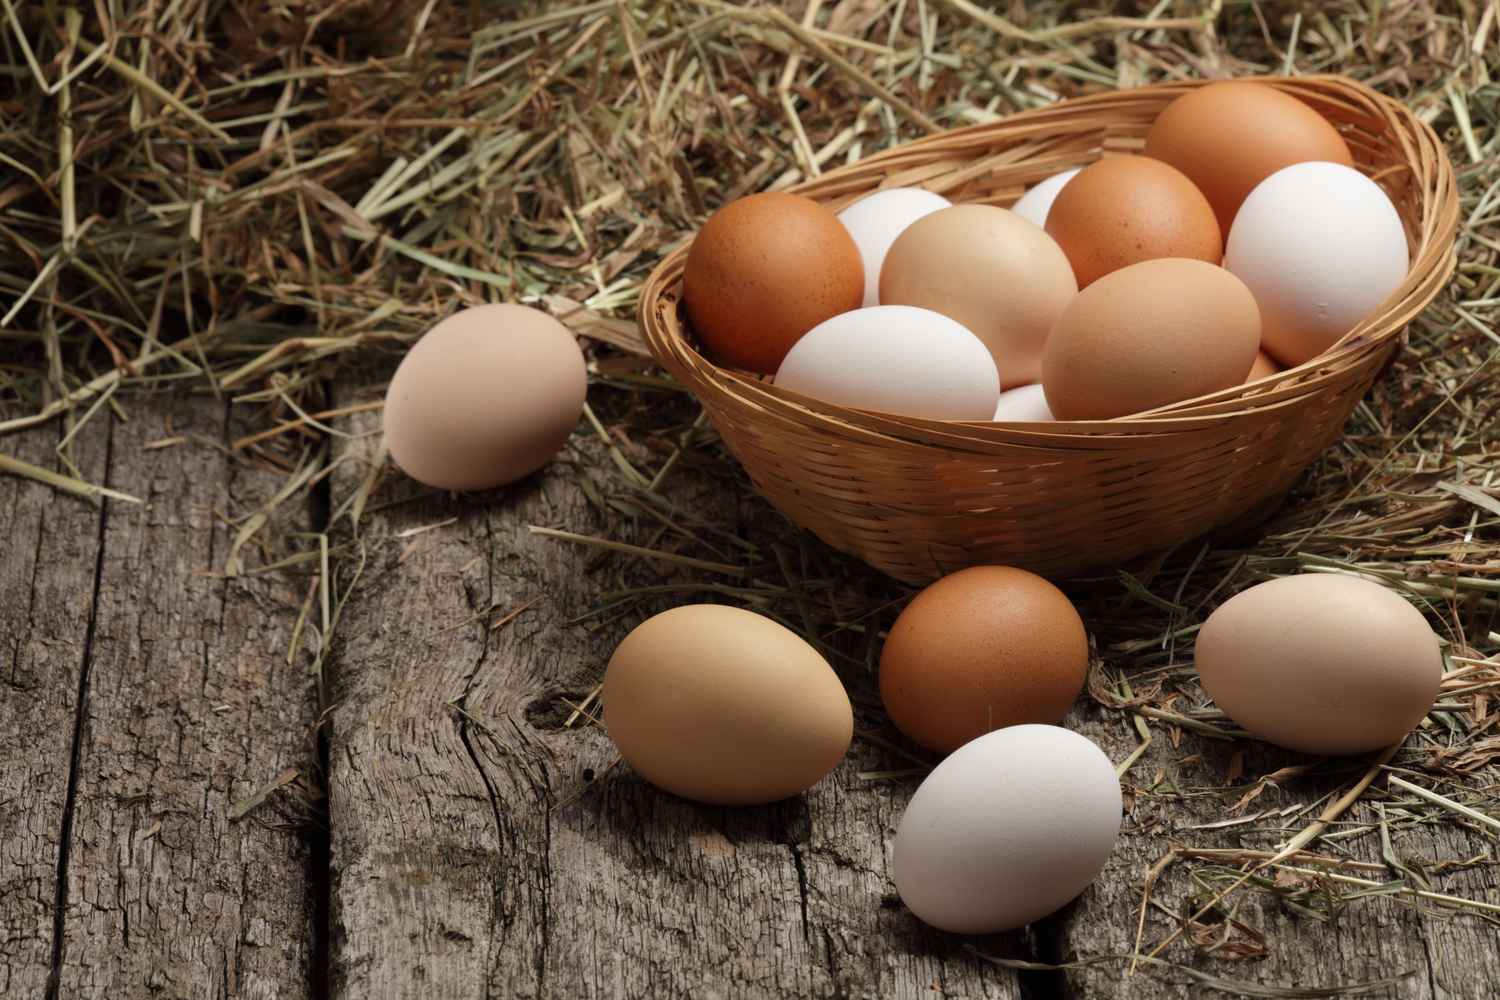 Eggs and Poultry